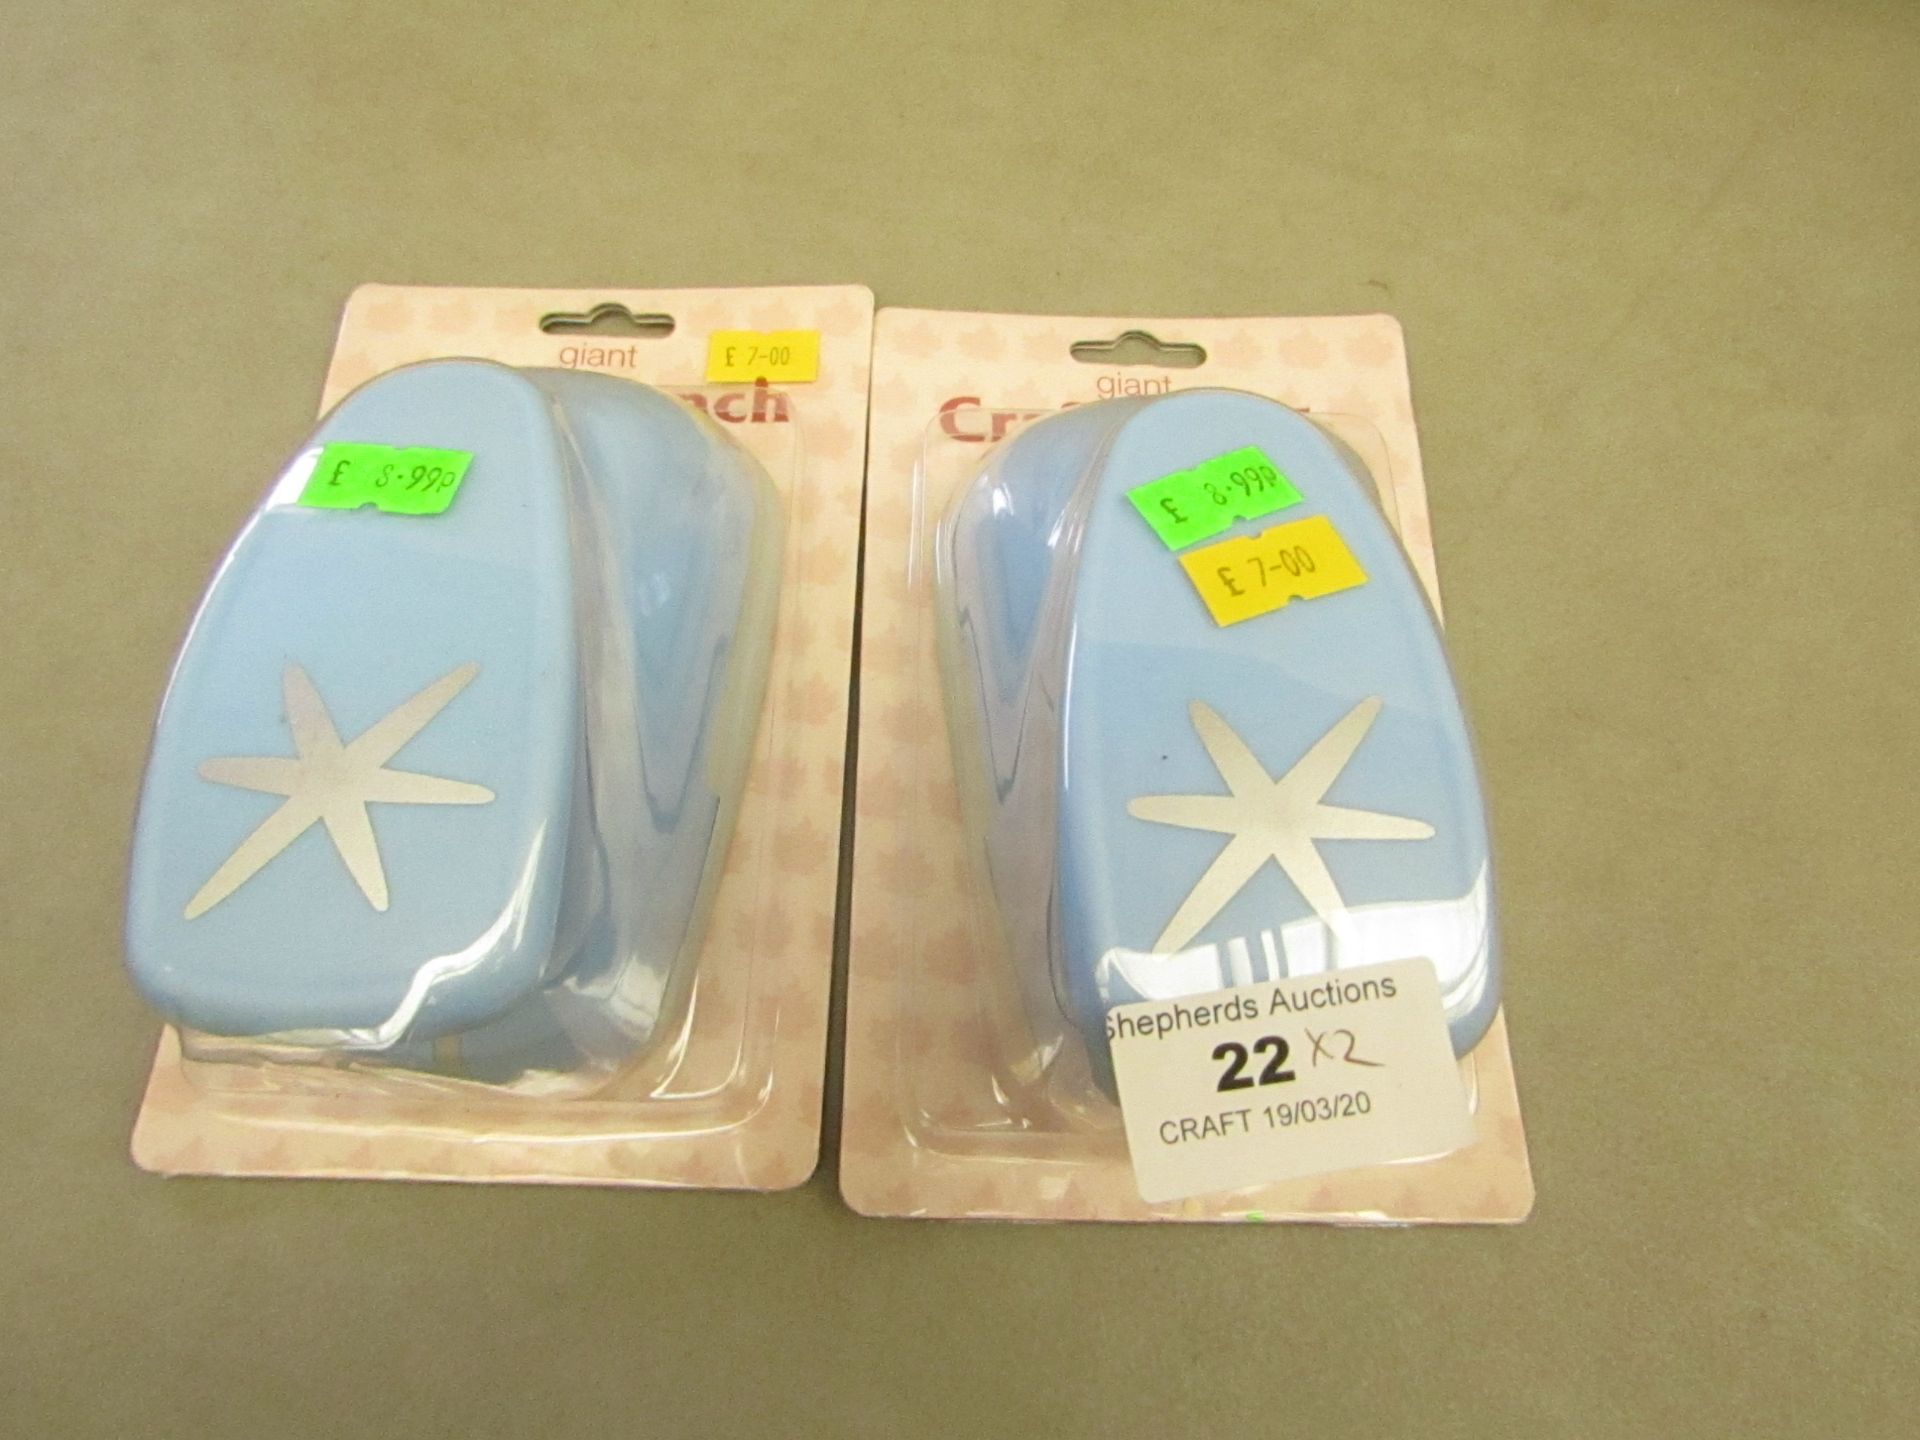 2 x Giant Craft Punch RRP £8.99 each new & packaged see image for design)